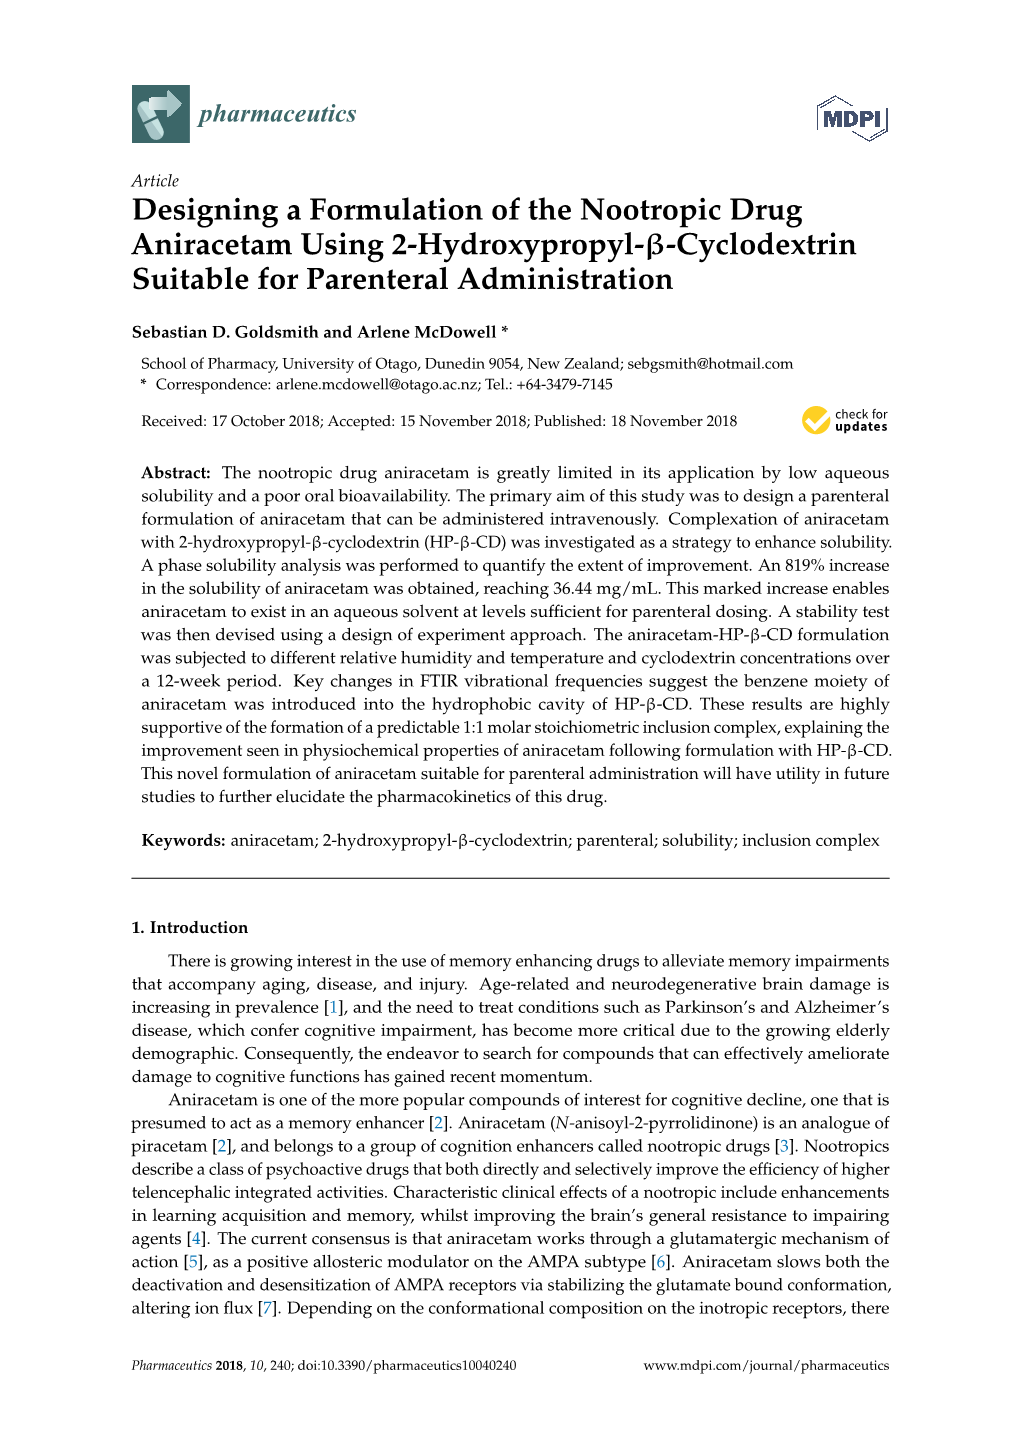 Designing a Formulation of the Nootropic Drug Aniracetam Using 2-Hydroxypropyl-Β-Cyclodextrin Suitable for Parenteral Administration